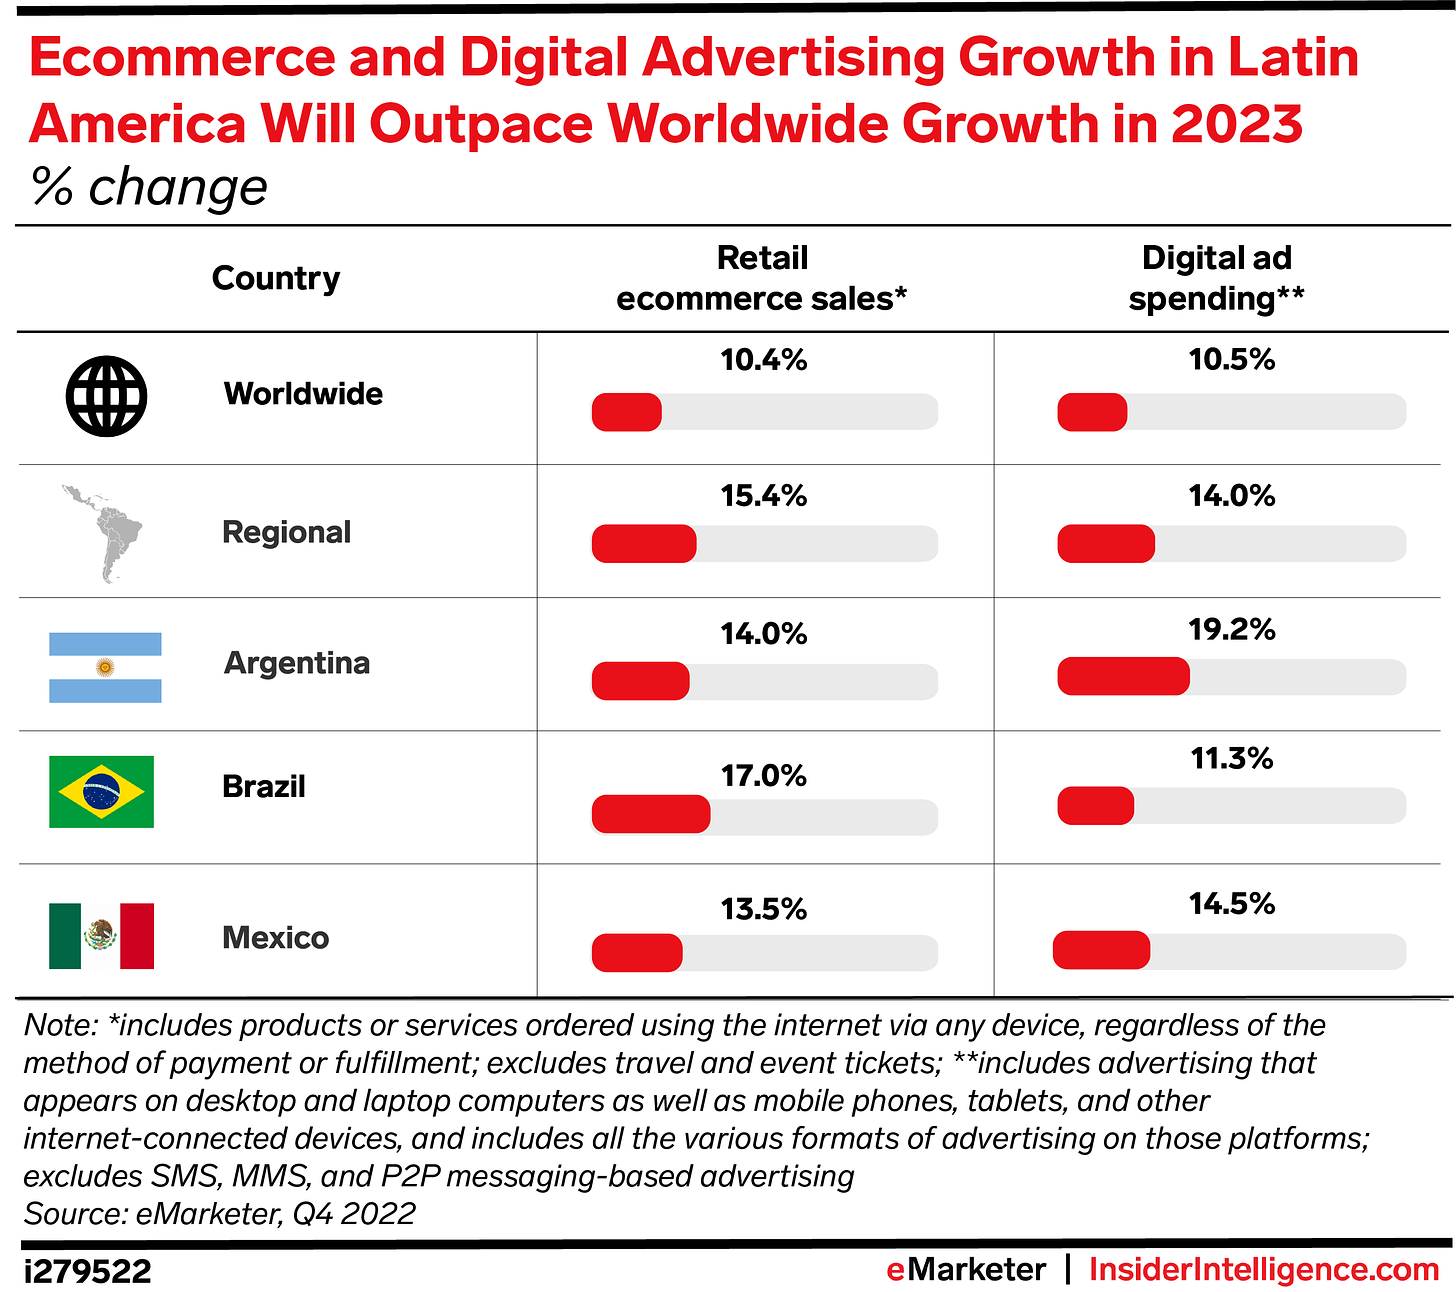 Ecommerce and Digital Advertising Growth in Latin America Will Outpace Worldwide Growth in 2023 (% change)